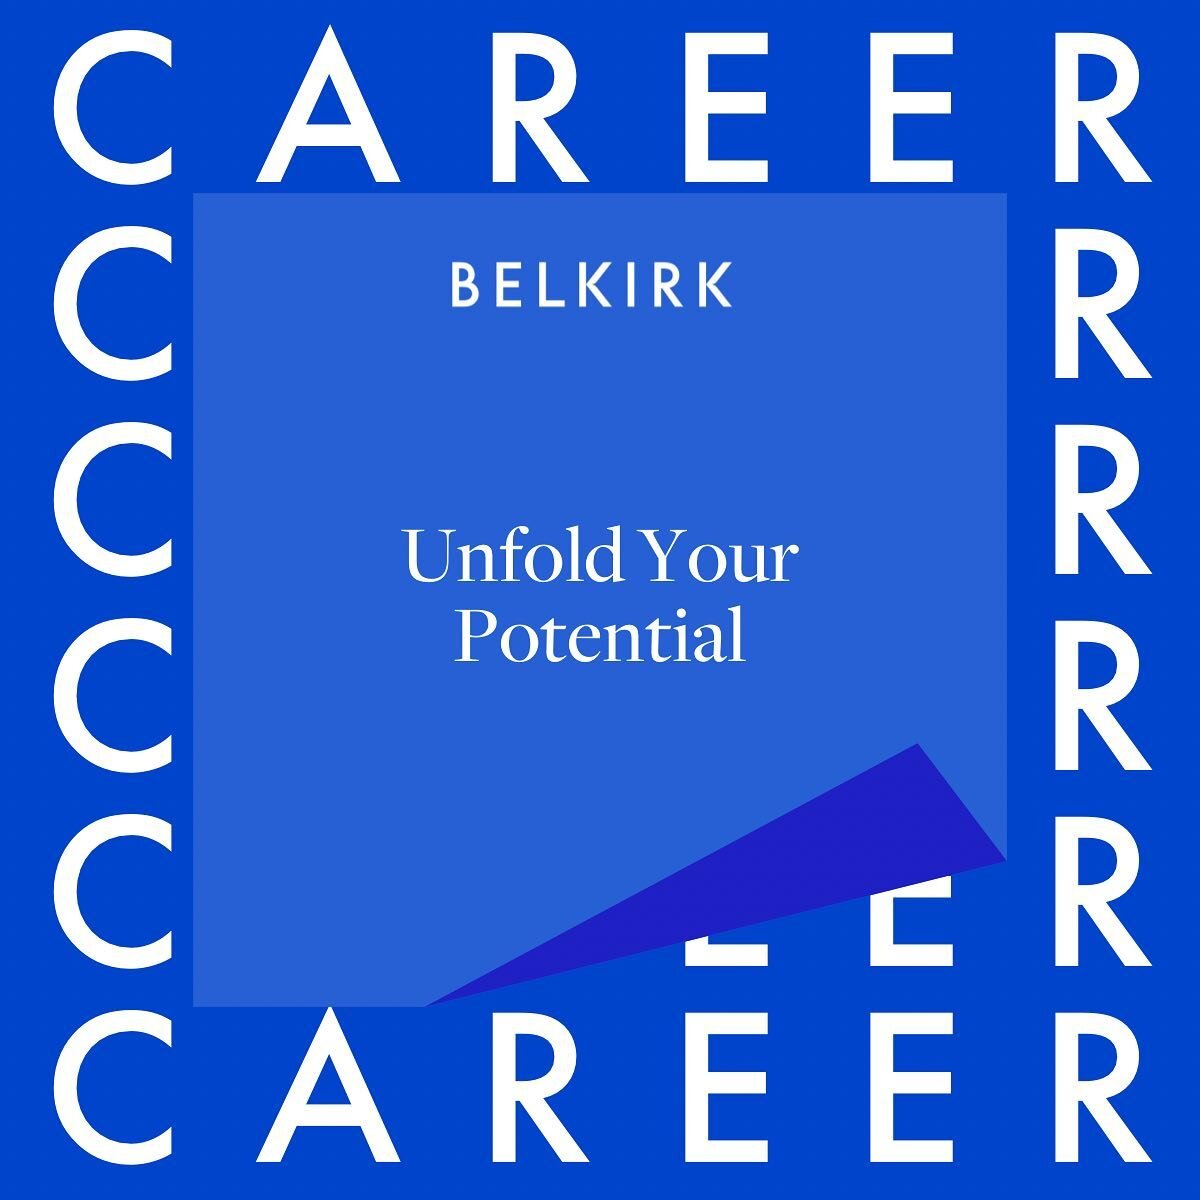 Belkirk- recruiting to the #property and #construction sectors in Melbourne&hellip; tell us about your career goals&hellip;
Head to our website www.Belkirkgroup.com to find out more